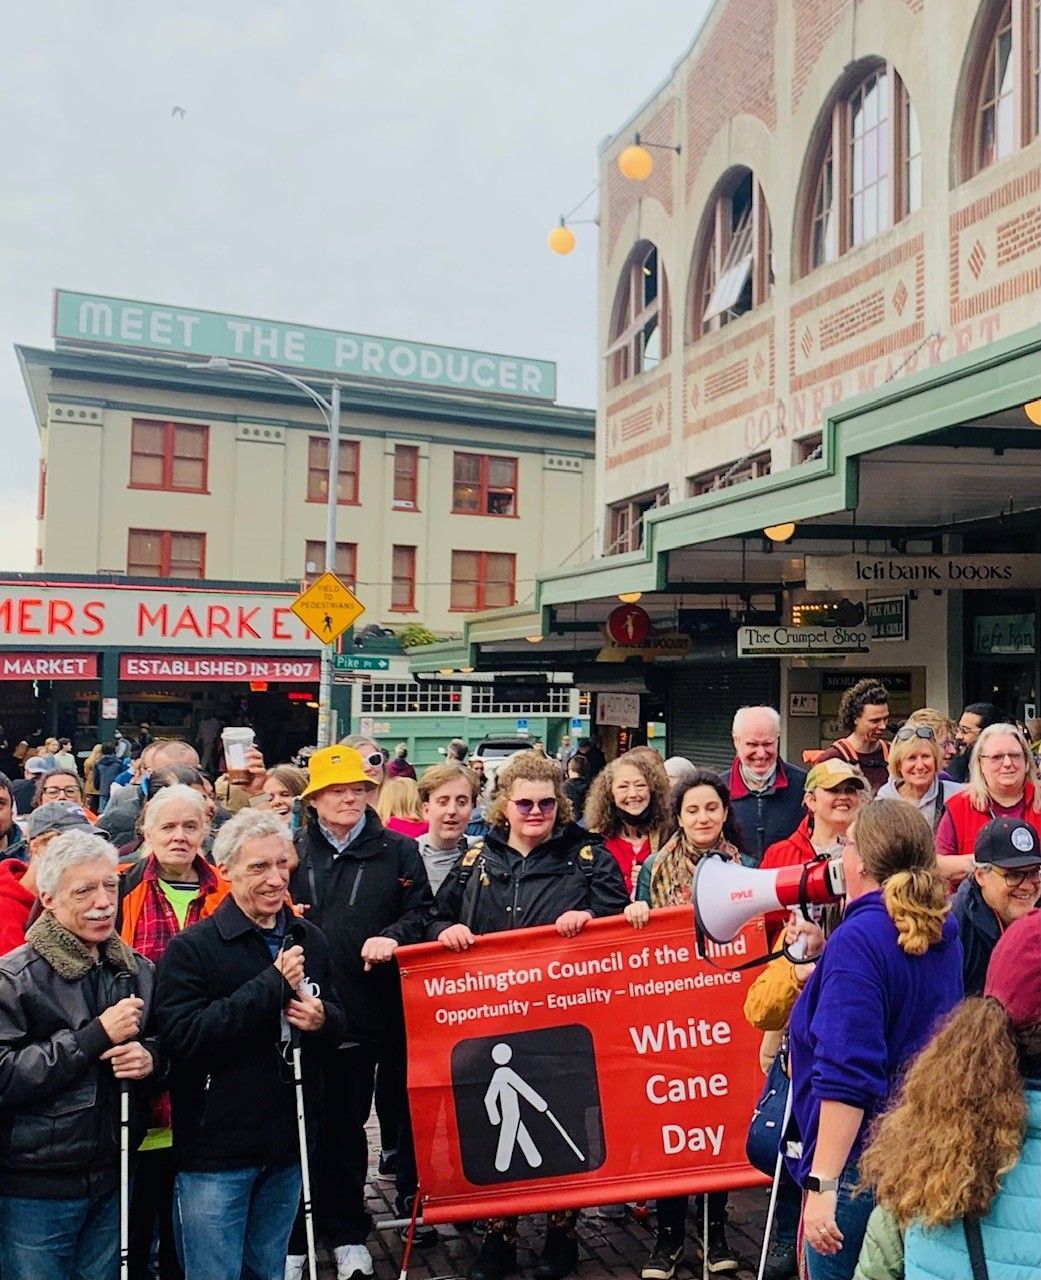 A group of people in front of Pike Place Market. A person with a megaphone speaking to people holding a sign and many attendees with white canes.